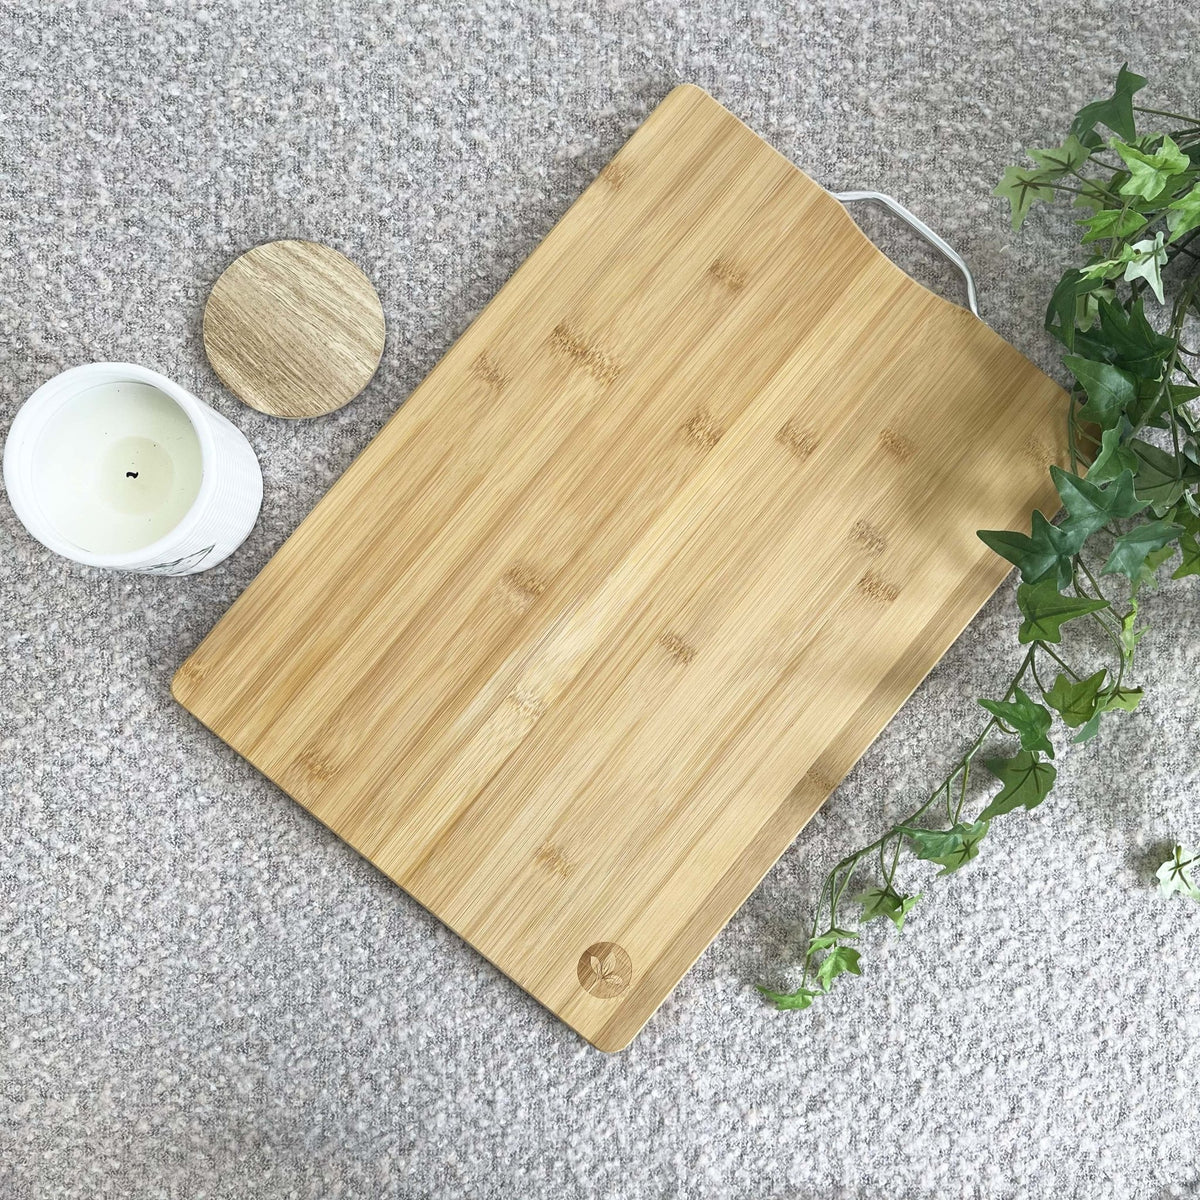 Large Bamboo Serving Board with candle and greenery